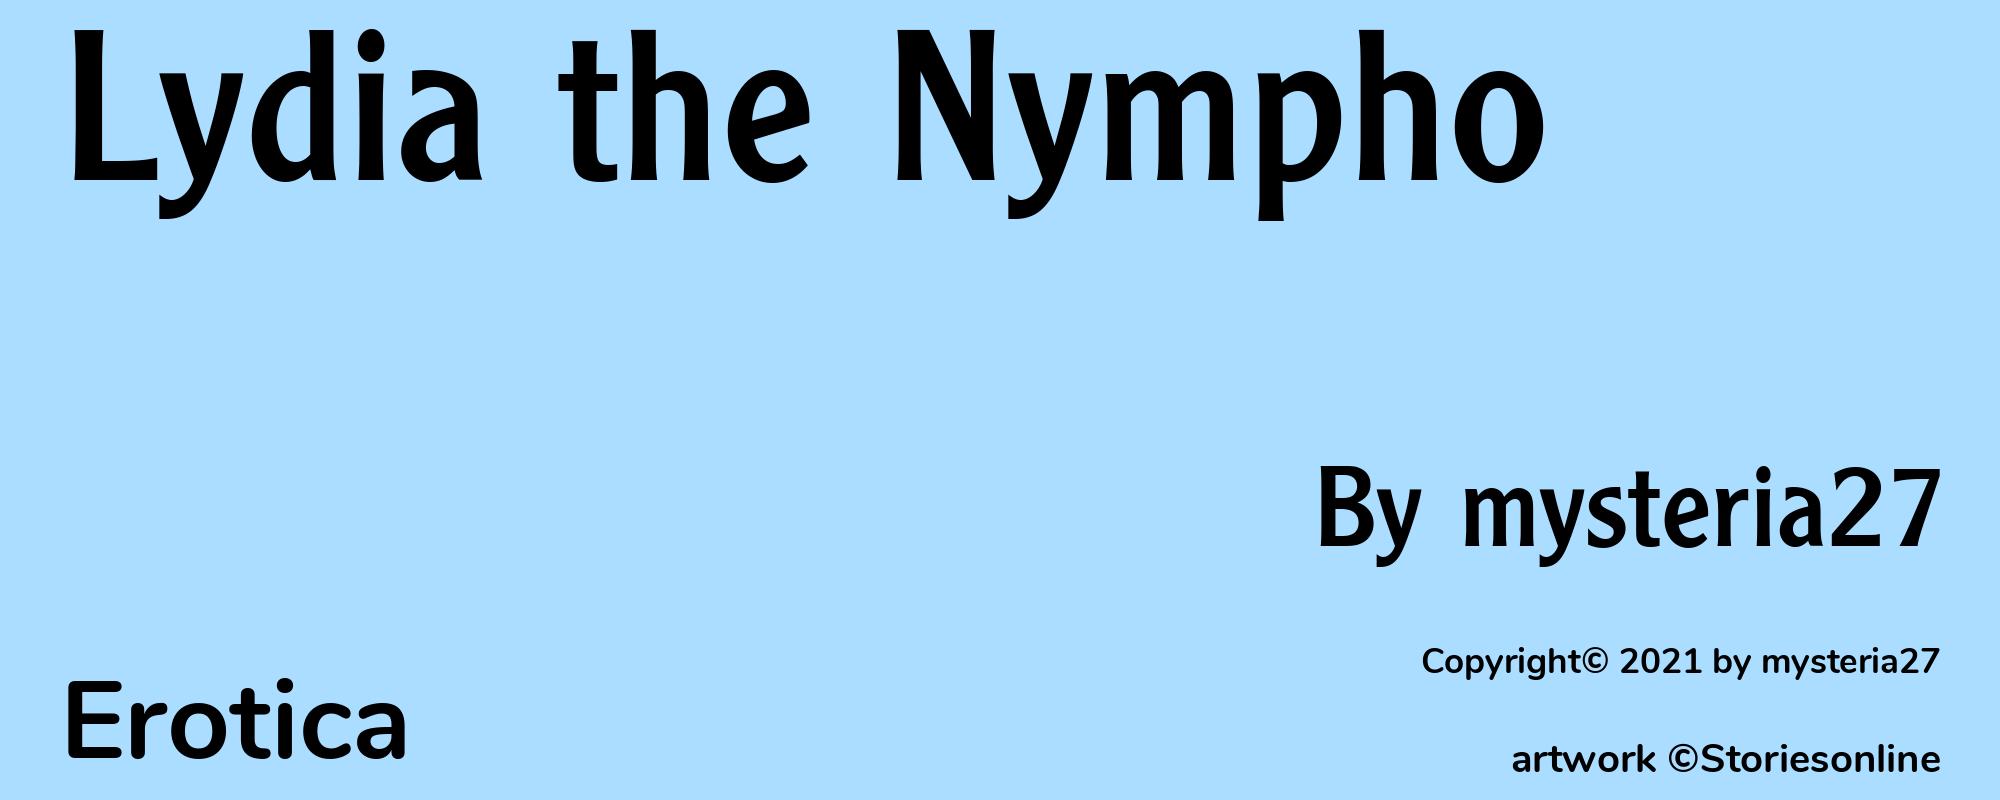 Lydia the Nympho - Cover